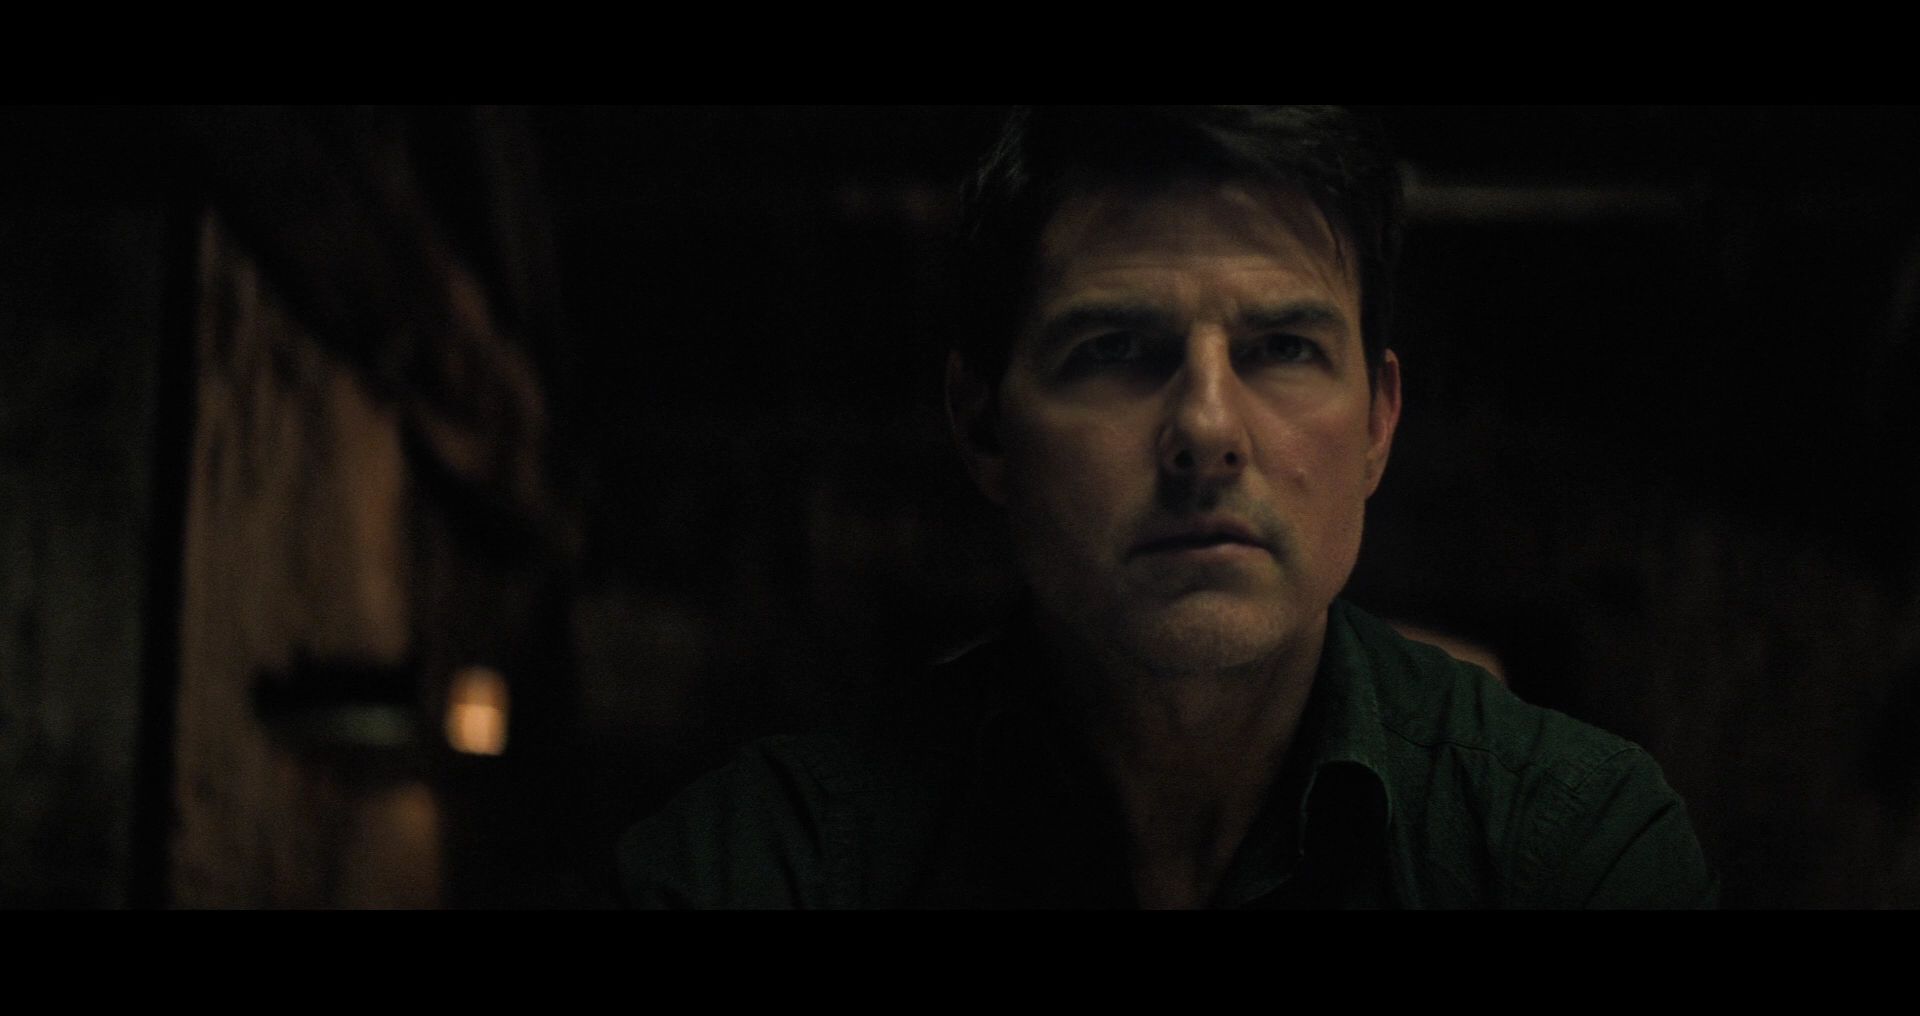 Mission-Impossible-Fallout-0127.jpg